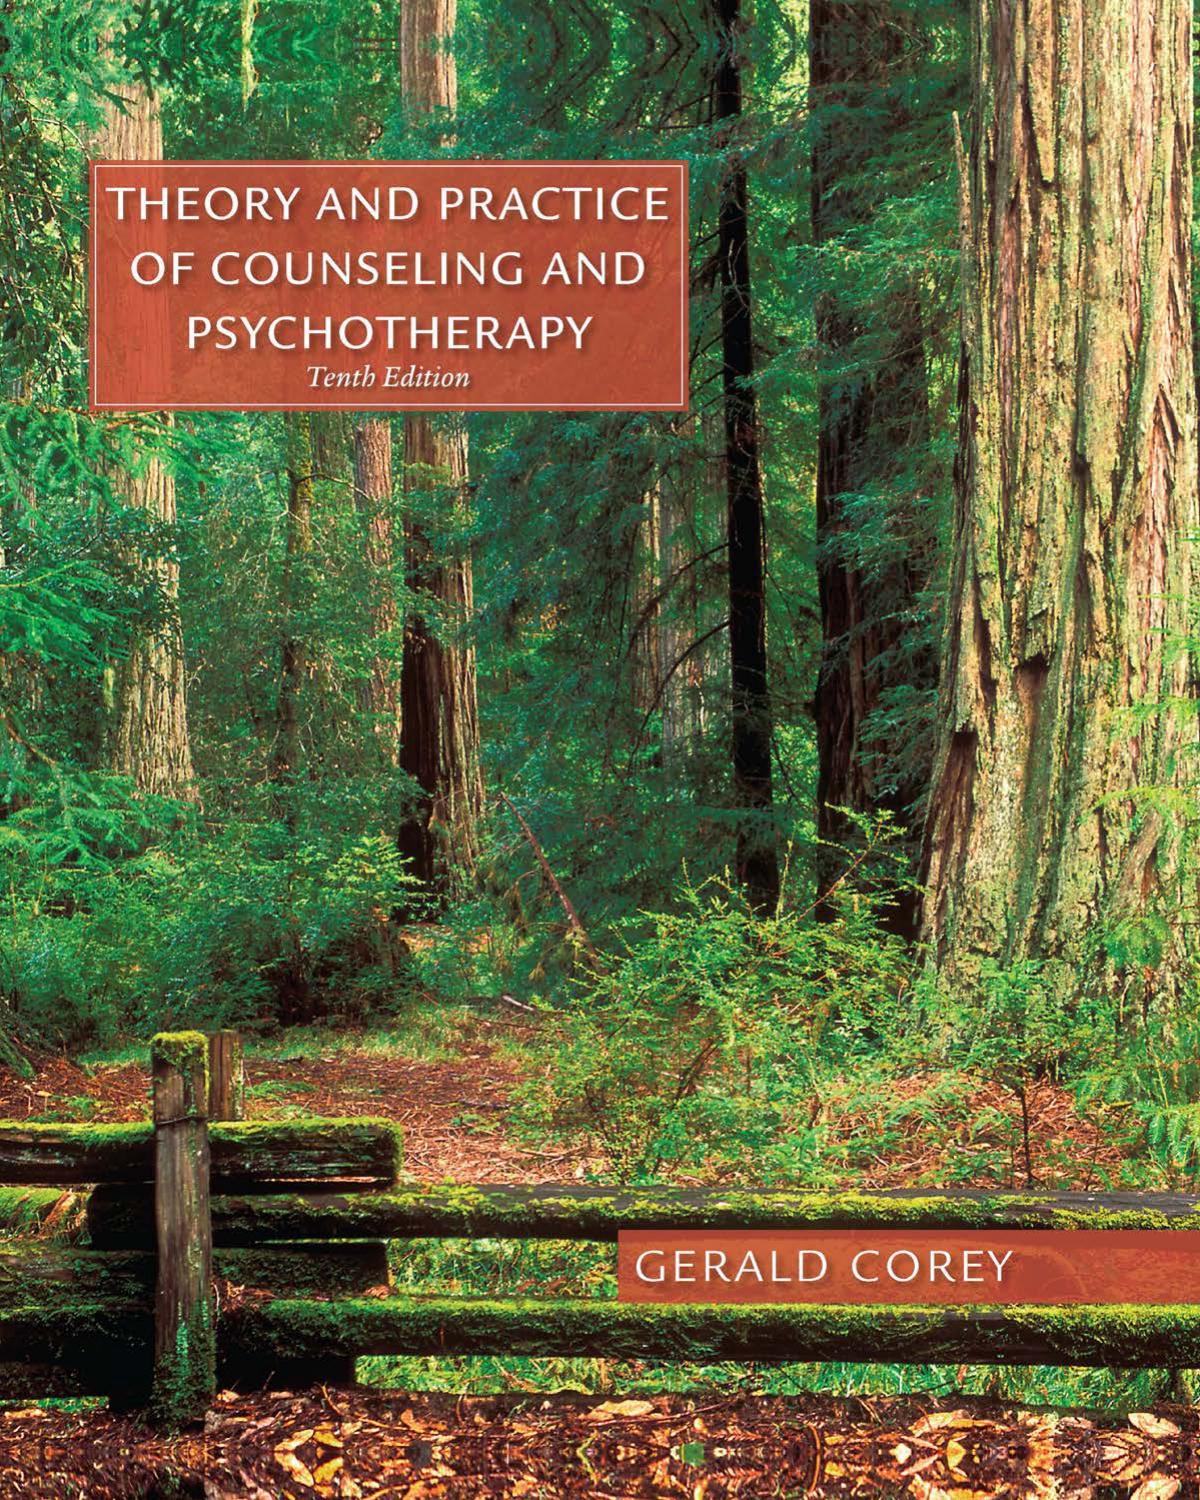 Theory and Practice of Counseling and Psychotherapy, 10th ed.